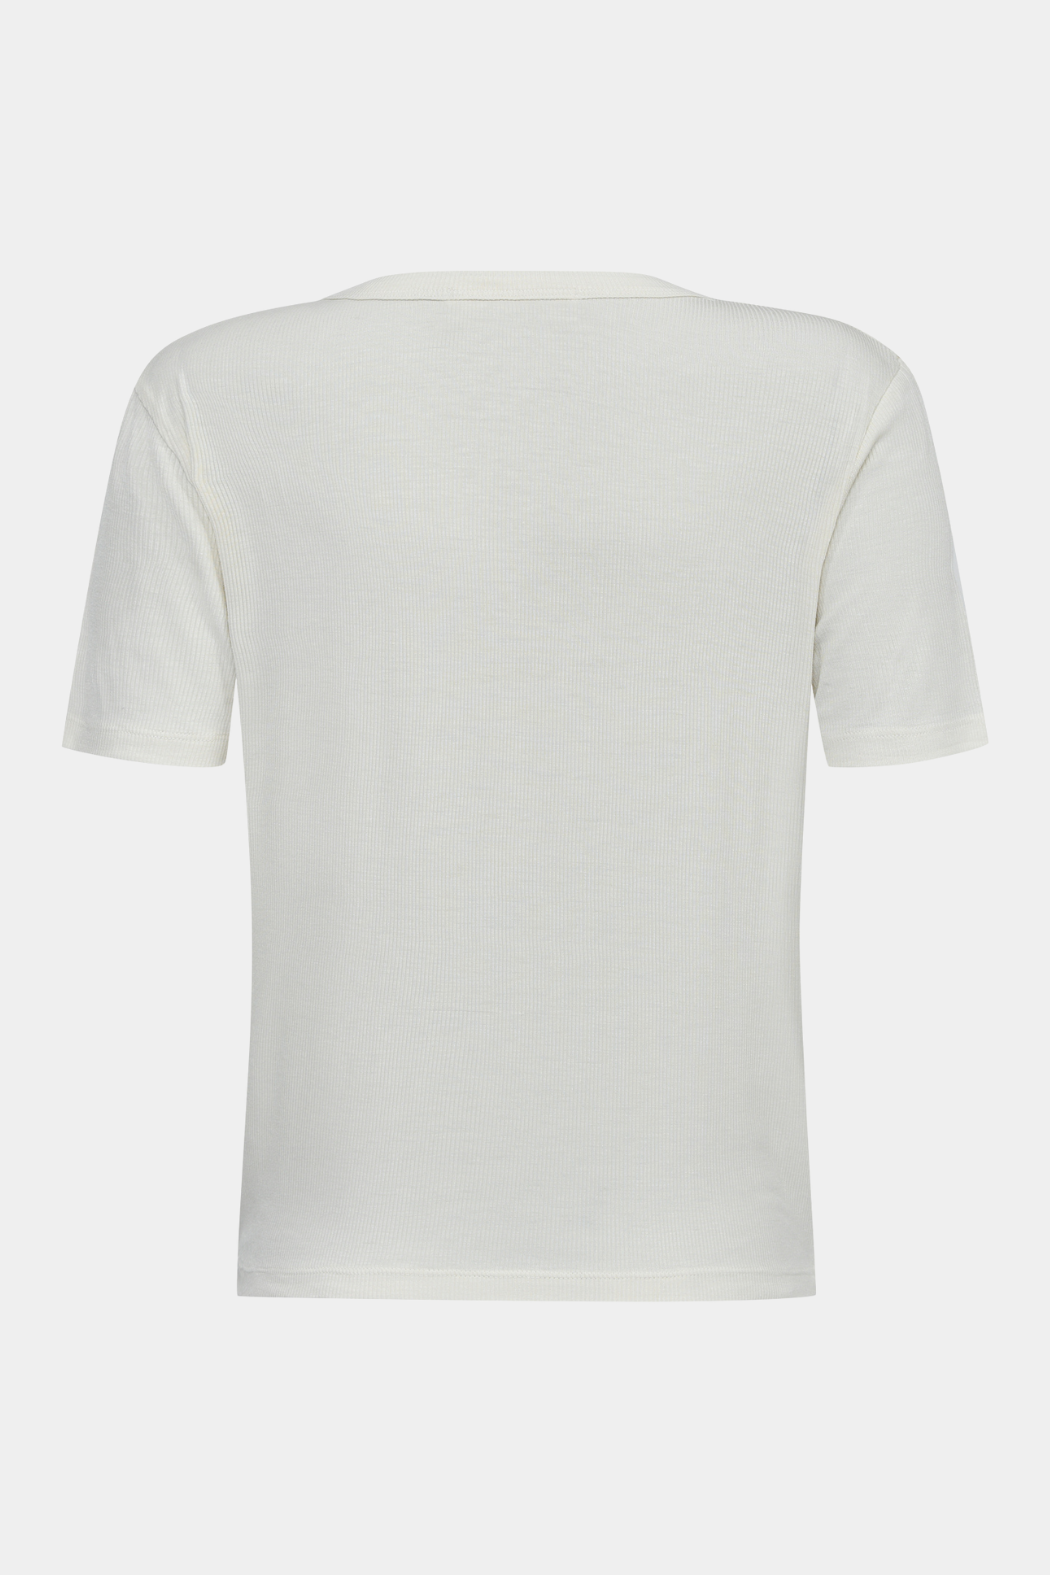 SNOS414 T-shirt, off white